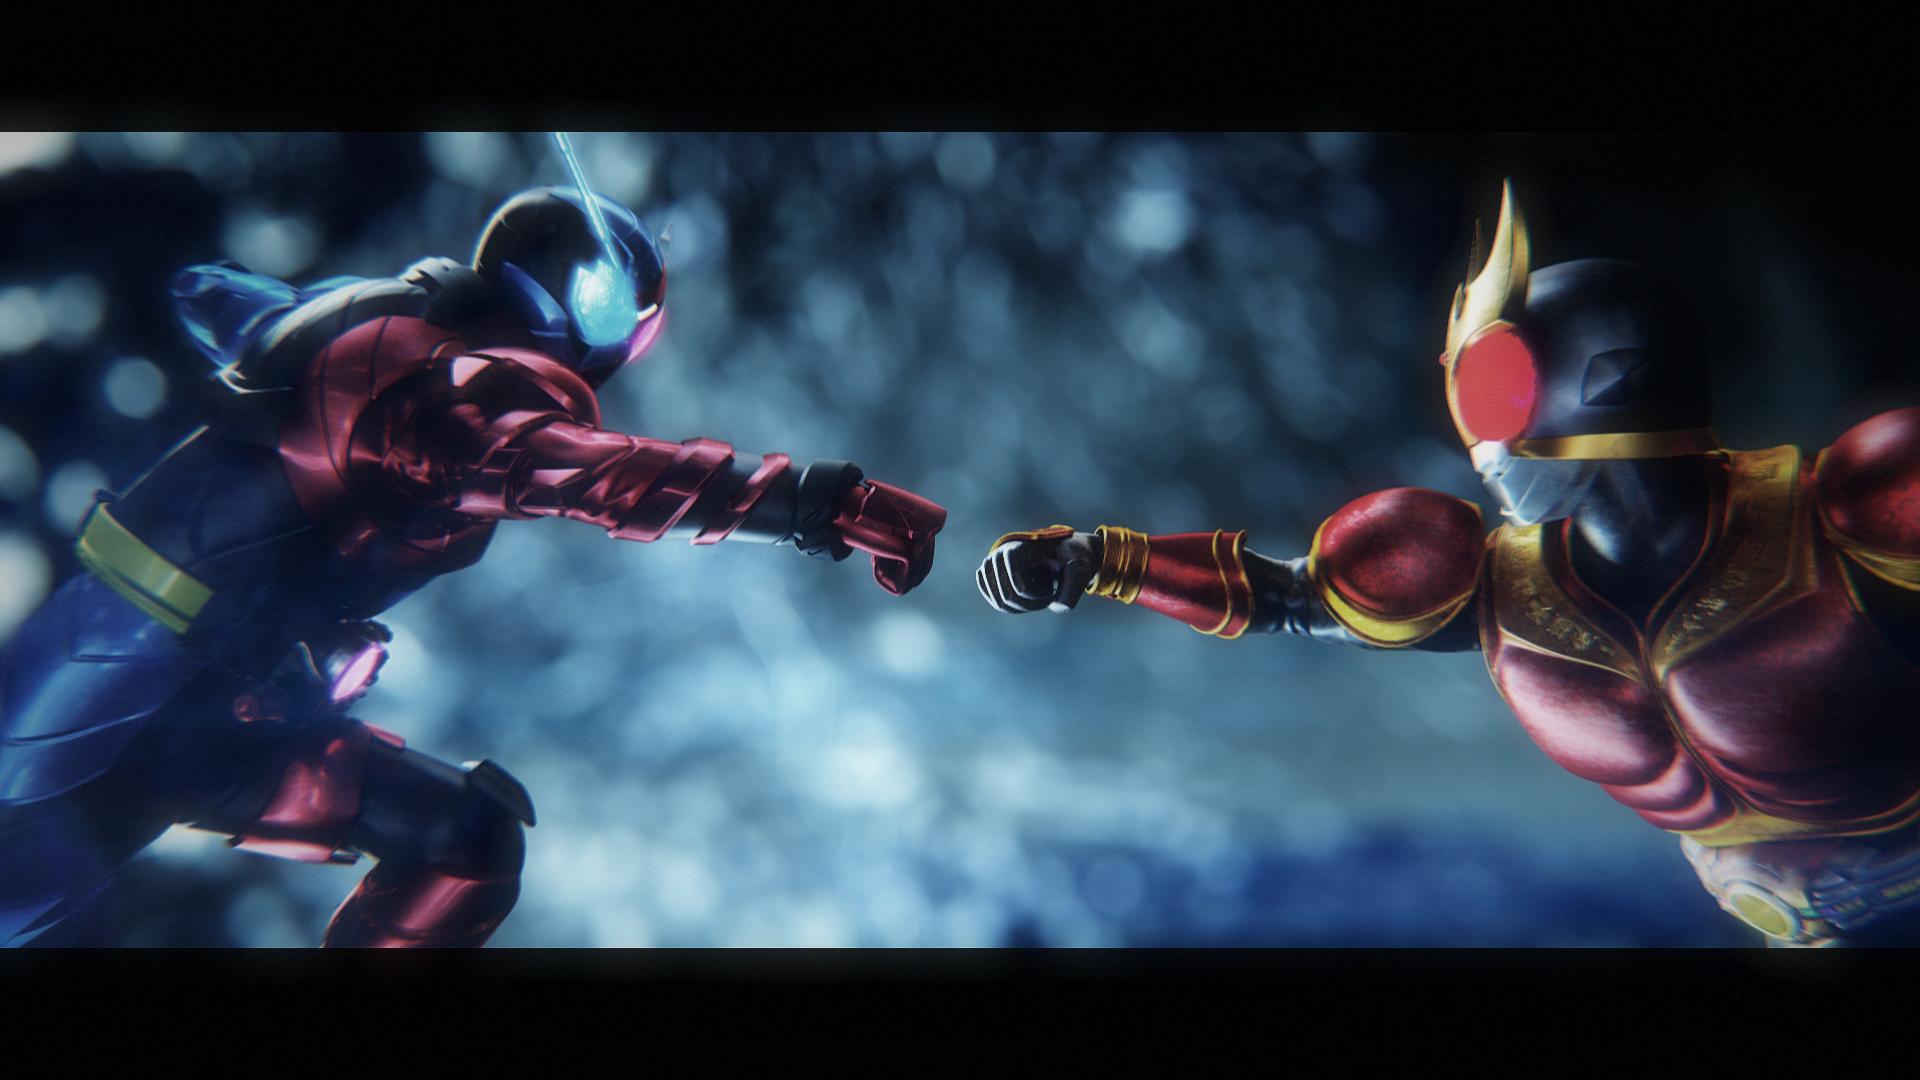 Kamen Rider Climax Fighters heads to PS4 on 7 Dec with English subs